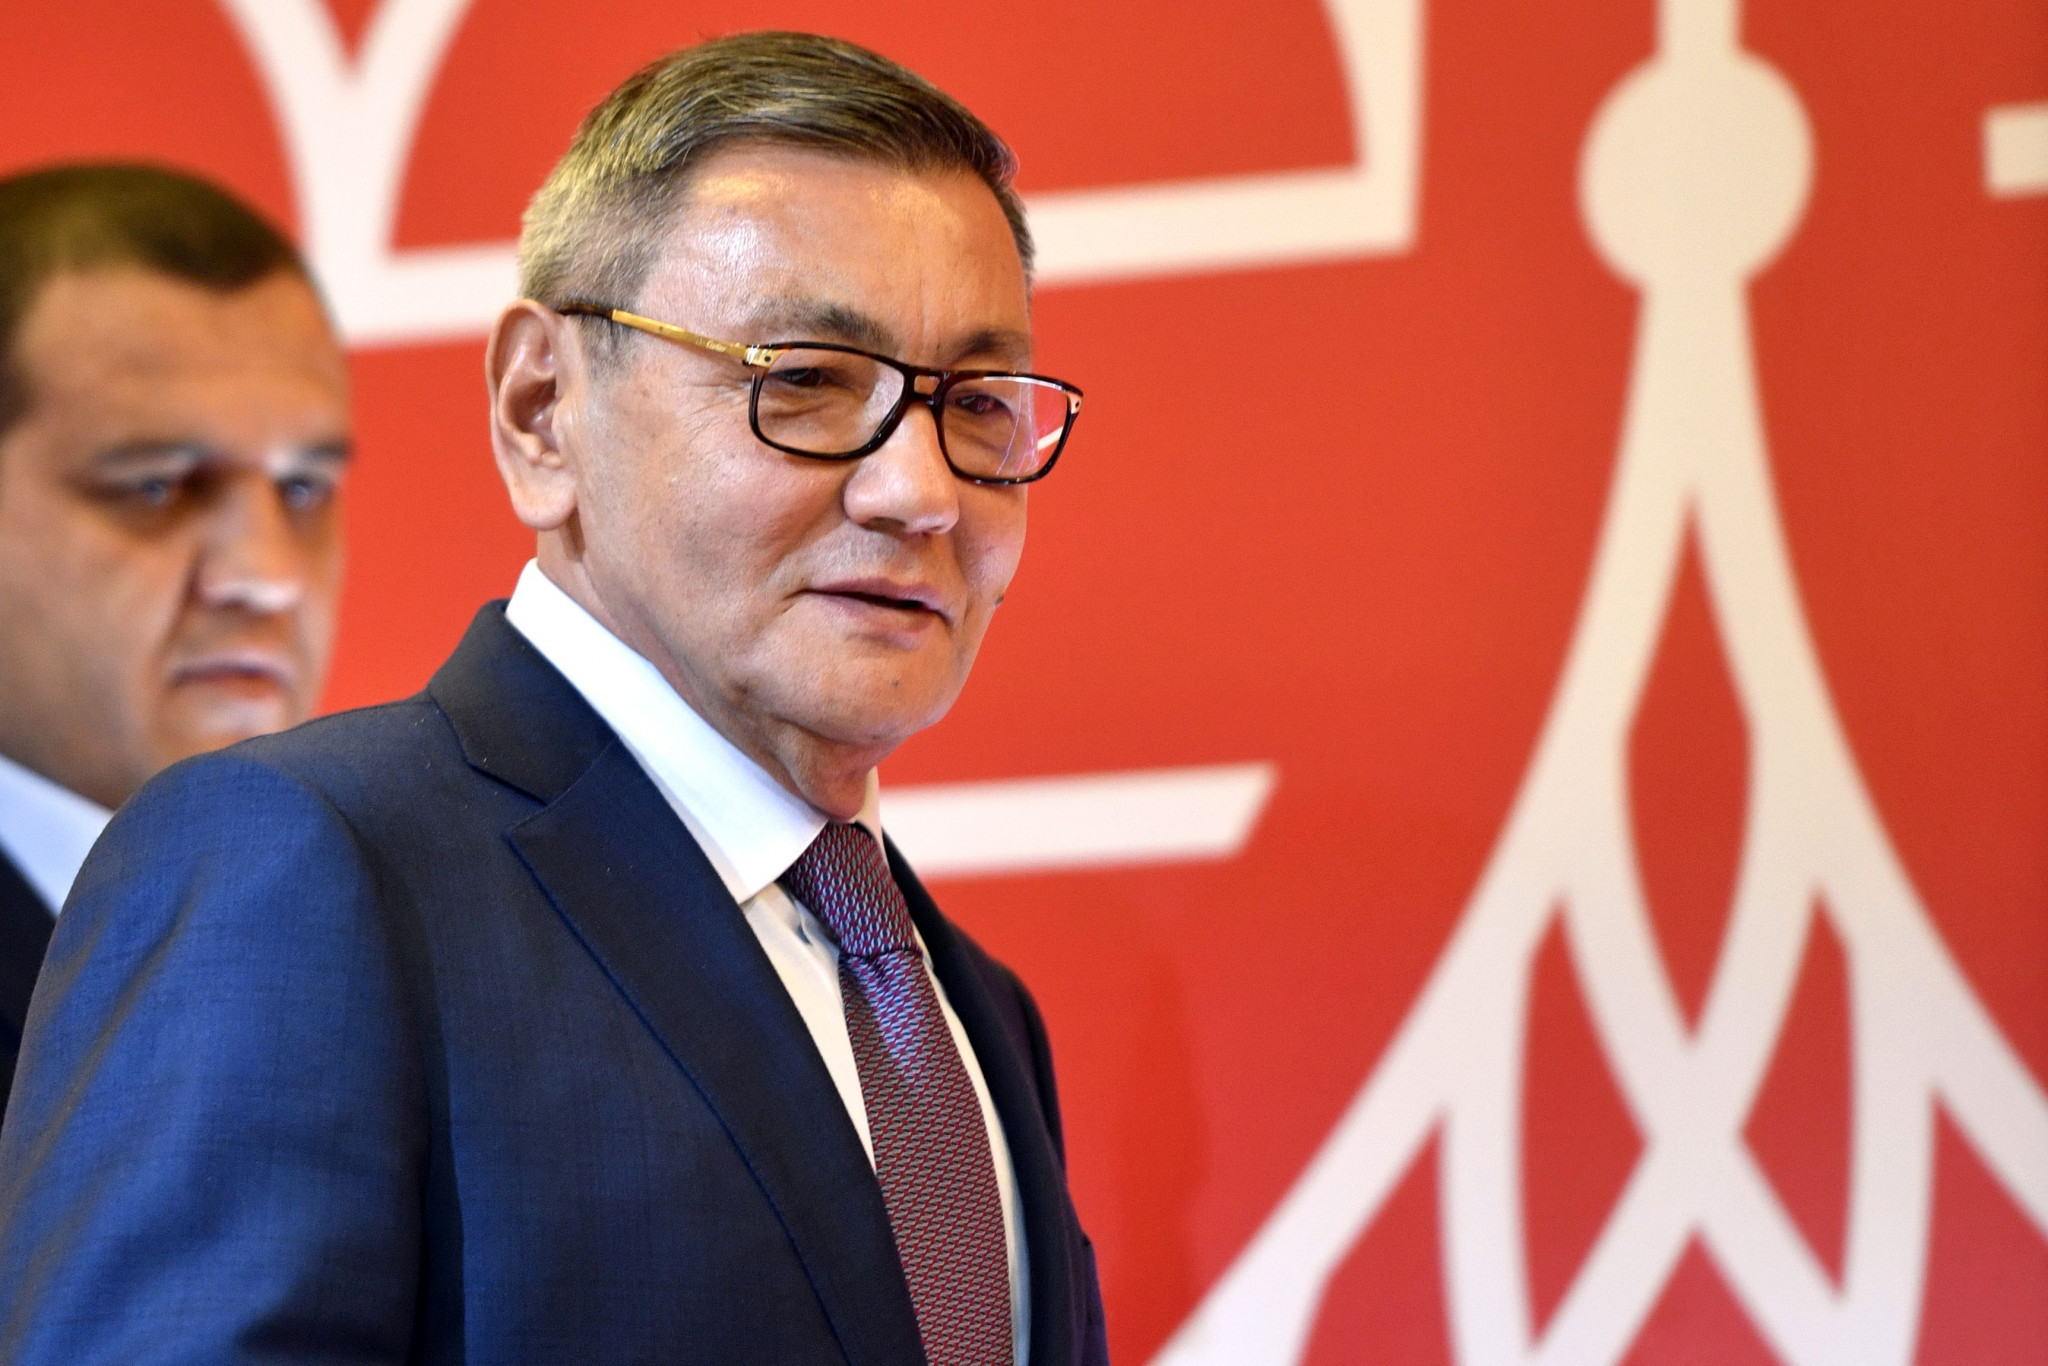 Former AIBA President Gafur Rakhimov stepped down as the last permanent President in March 2019 ©Getty Images